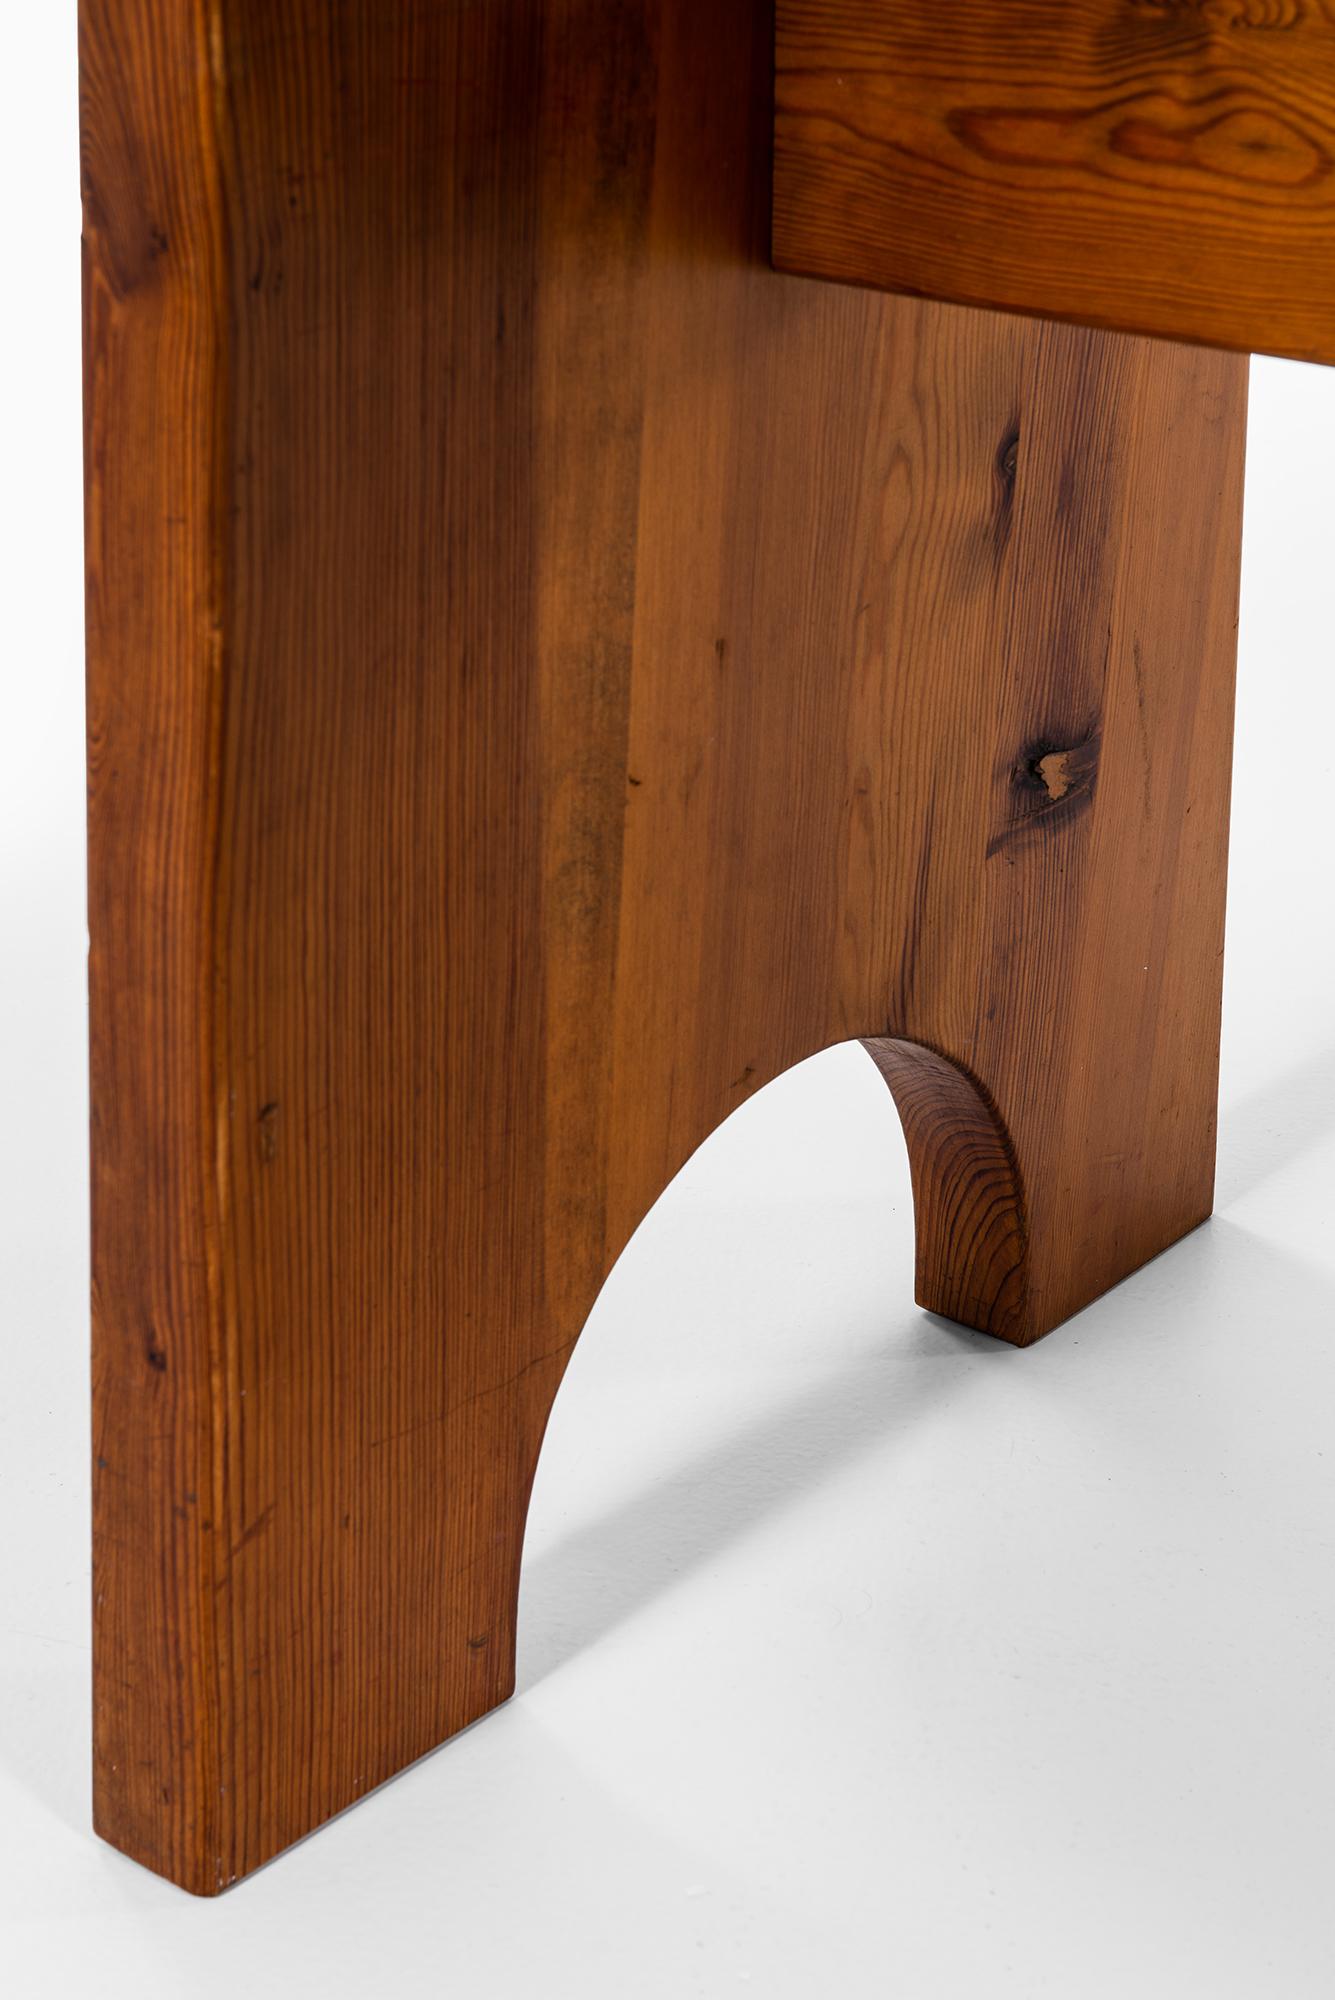 Axel Einar Hjorth Attributed Dining Table in Pine Produced in Sweden 2